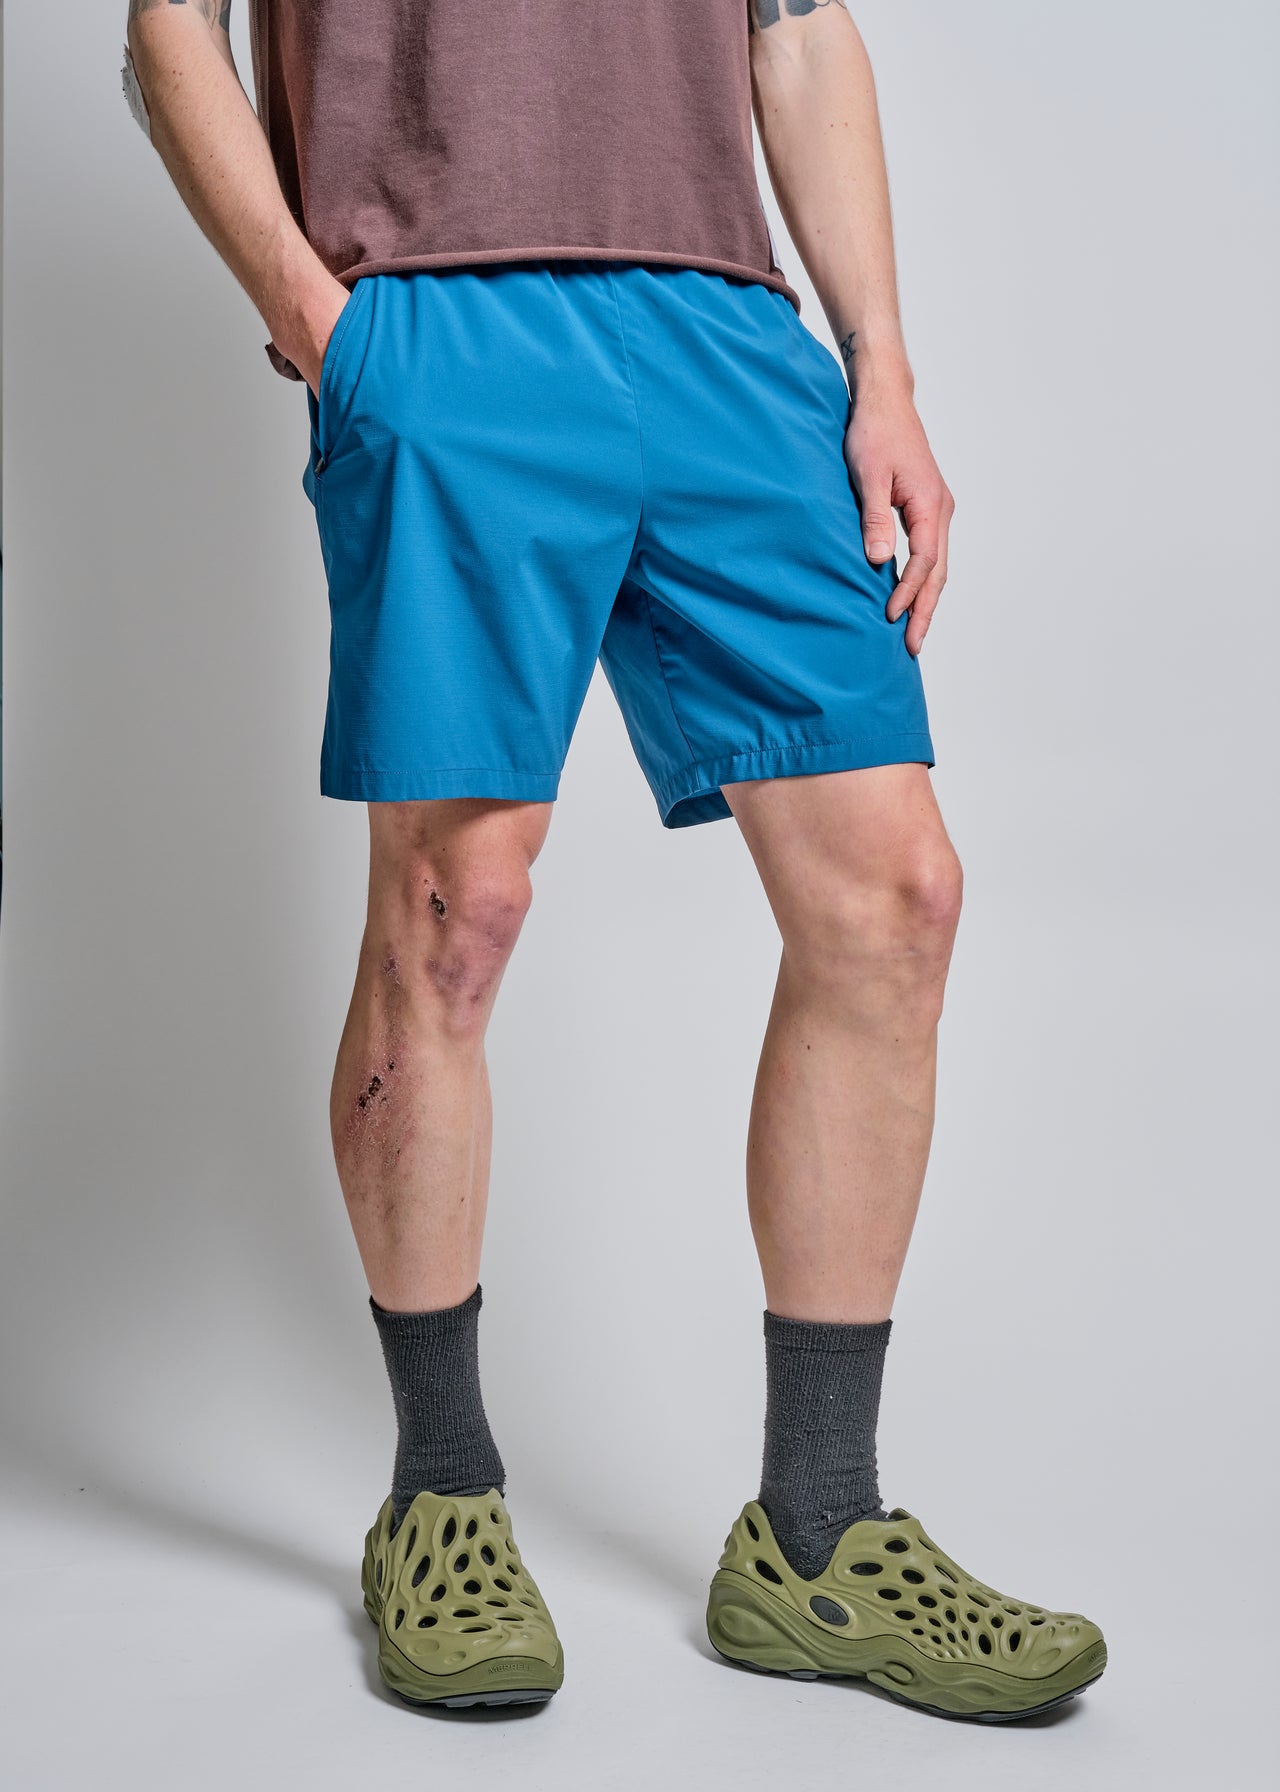 Pace Wind Shorts in Out of the Blue